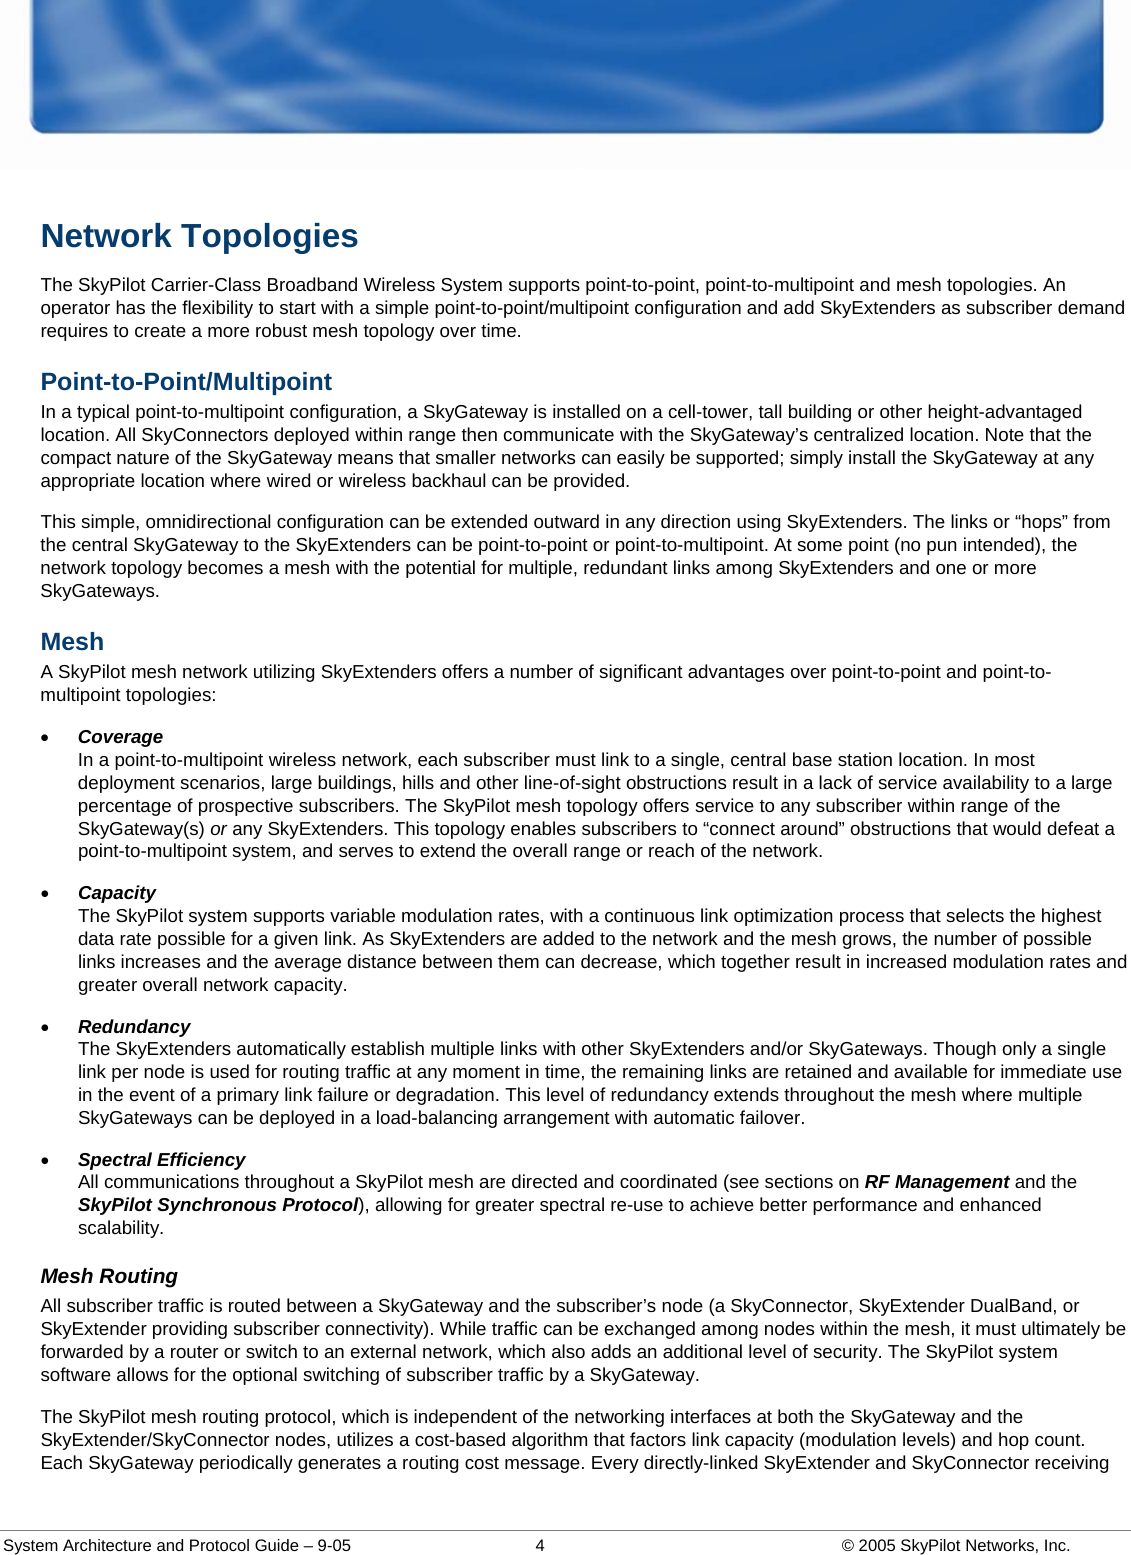  System Architecture and Protocol Guide – 9-05  4  © 2005 SkyPilot Networks, Inc. Network Topologies The SkyPilot Carrier-Class Broadband Wireless System supports point-to-point, point-to-multipoint and mesh topologies. An operator has the flexibility to start with a simple point-to-point/multipoint configuration and add SkyExtenders as subscriber demand requires to create a more robust mesh topology over time.  Point-to-Point/Multipoint  In a typical point-to-multipoint configuration, a SkyGateway is installed on a cell-tower, tall building or other height-advantaged location. All SkyConnectors deployed within range then communicate with the SkyGateway’s centralized location. Note that the compact nature of the SkyGateway means that smaller networks can easily be supported; simply install the SkyGateway at any appropriate location where wired or wireless backhaul can be provided.  This simple, omnidirectional configuration can be extended outward in any direction using SkyExtenders. The links or “hops” from the central SkyGateway to the SkyExtenders can be point-to-point or point-to-multipoint. At some point (no pun intended), the network topology becomes a mesh with the potential for multiple, redundant links among SkyExtenders and one or more SkyGateways.  Mesh A SkyPilot mesh network utilizing SkyExtenders offers a number of significant advantages over point-to-point and point-to-multipoint topologies:  • Coverage In a point-to-multipoint wireless network, each subscriber must link to a single, central base station location. In most deployment scenarios, large buildings, hills and other line-of-sight obstructions result in a lack of service availability to a large percentage of prospective subscribers. The SkyPilot mesh topology offers service to any subscriber within range of the SkyGateway(s) or any SkyExtenders. This topology enables subscribers to “connect around” obstructions that would defeat a point-to-multipoint system, and serves to extend the overall range or reach of the network.  • Capacity The SkyPilot system supports variable modulation rates, with a continuous link optimization process that selects the highest data rate possible for a given link. As SkyExtenders are added to the network and the mesh grows, the number of possible links increases and the average distance between them can decrease, which together result in increased modulation rates and greater overall network capacity.  • Redundancy The SkyExtenders automatically establish multiple links with other SkyExtenders and/or SkyGateways. Though only a single link per node is used for routing traffic at any moment in time, the remaining links are retained and available for immediate use in the event of a primary link failure or degradation. This level of redundancy extends throughout the mesh where multiple SkyGateways can be deployed in a load-balancing arrangement with automatic failover.  • Spectral Efficiency All communications throughout a SkyPilot mesh are directed and coordinated (see sections on RF Management and the SkyPilot Synchronous Protocol), allowing for greater spectral re-use to achieve better performance and enhanced scalability.  Mesh Routing All subscriber traffic is routed between a SkyGateway and the subscriber’s node (a SkyConnector, SkyExtender DualBand, or SkyExtender providing subscriber connectivity). While traffic can be exchanged among nodes within the mesh, it must ultimately be forwarded by a router or switch to an external network, which also adds an additional level of security. The SkyPilot system software allows for the optional switching of subscriber traffic by a SkyGateway.  The SkyPilot mesh routing protocol, which is independent of the networking interfaces at both the SkyGateway and the SkyExtender/SkyConnector nodes, utilizes a cost-based algorithm that factors link capacity (modulation levels) and hop count. Each SkyGateway periodically generates a routing cost message. Every directly-linked SkyExtender and SkyConnector receiving 